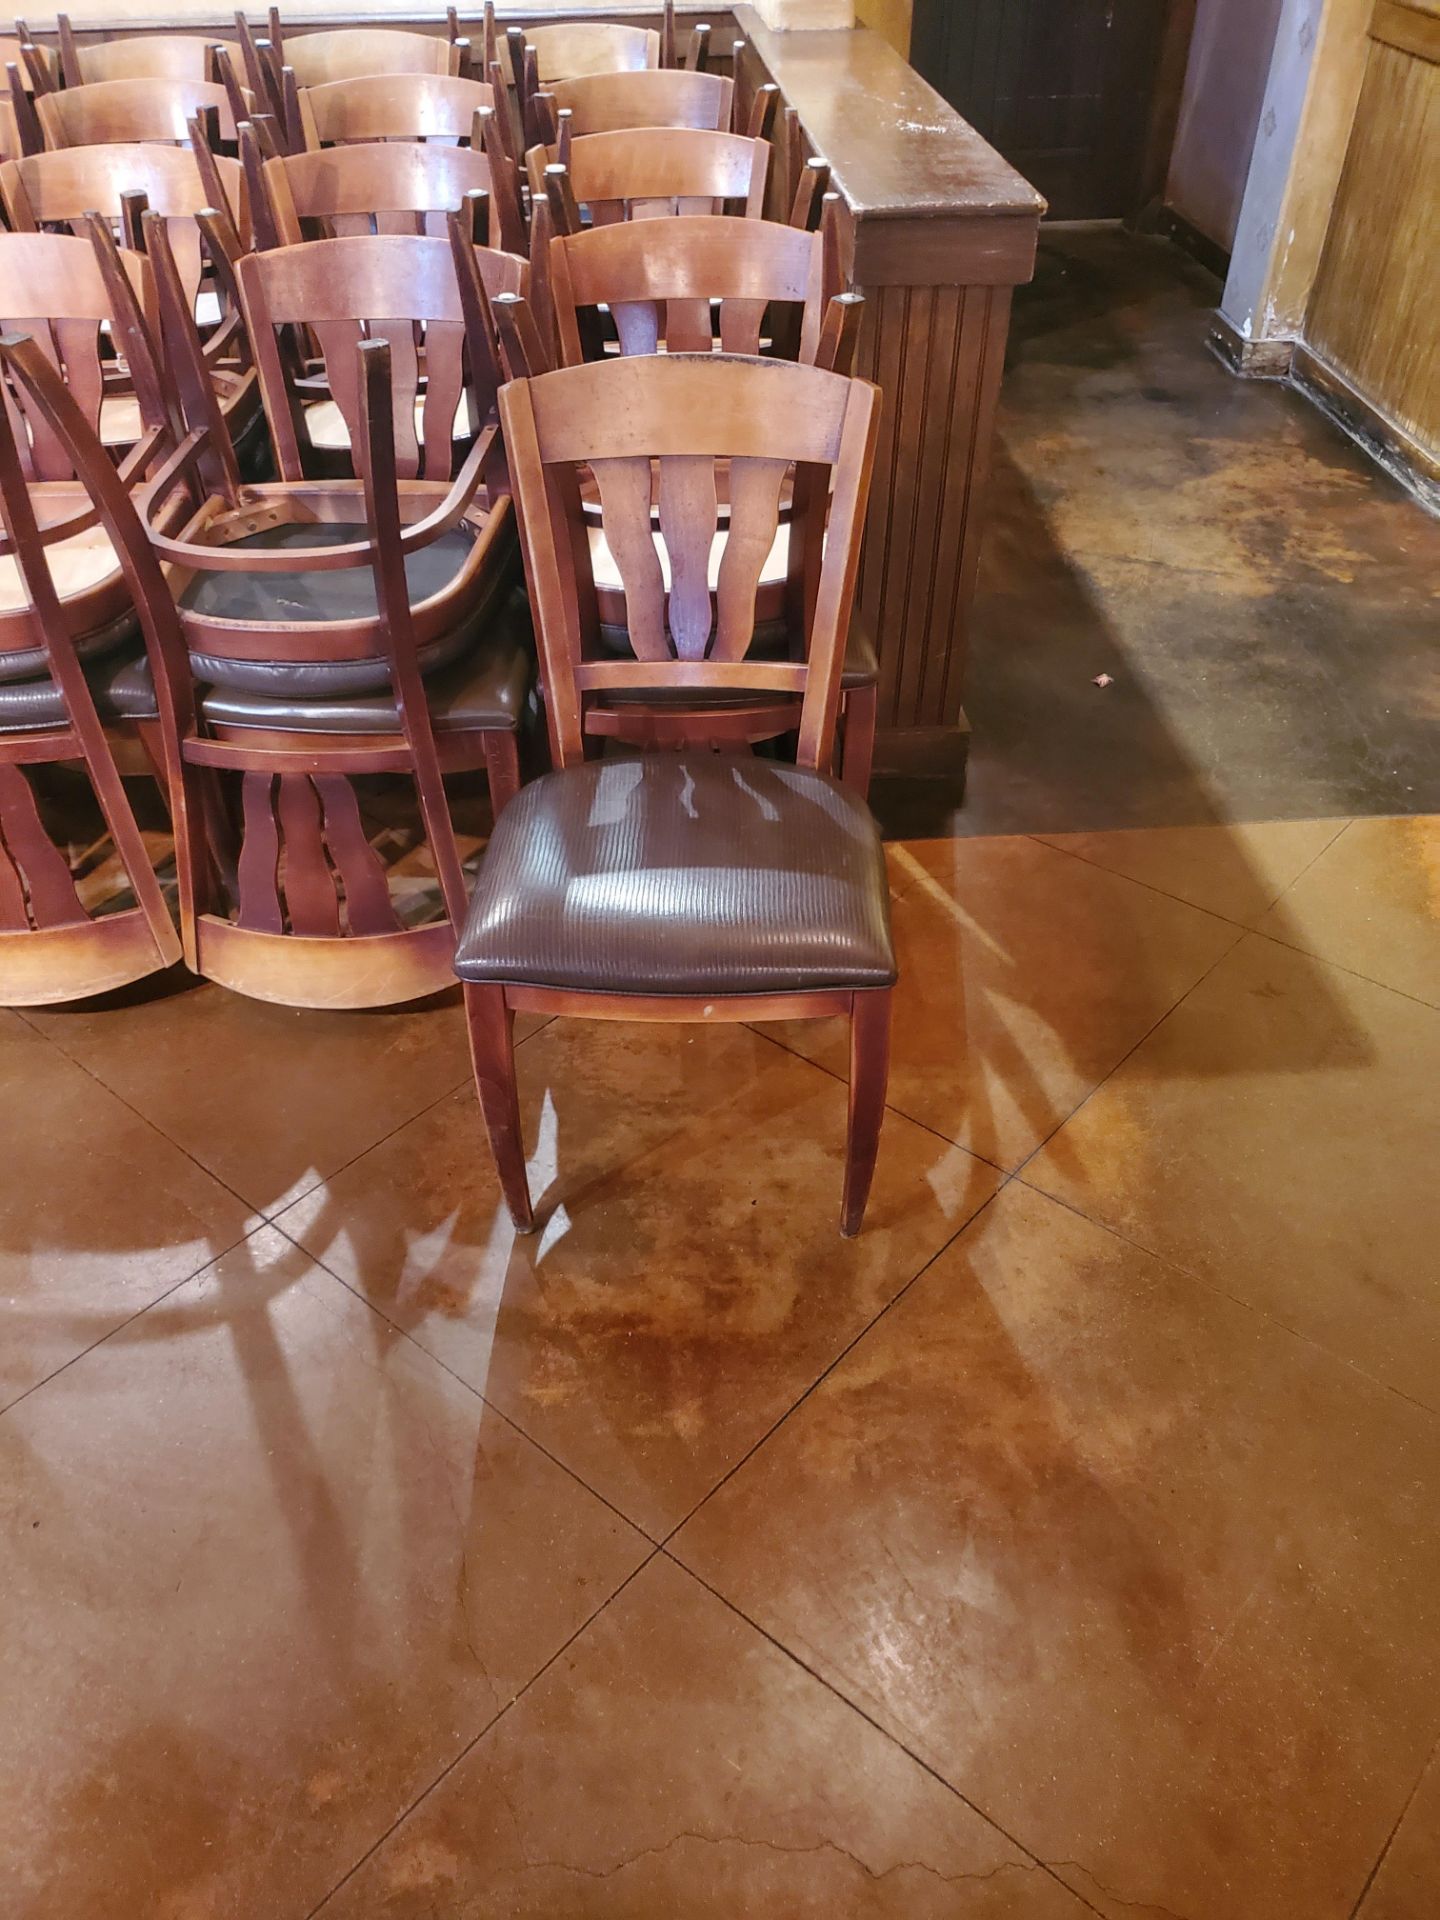 50 WOODEN RESTAURANT CHAIRS SUBJECT TO COUNT AND SOLD BY THE PIECE